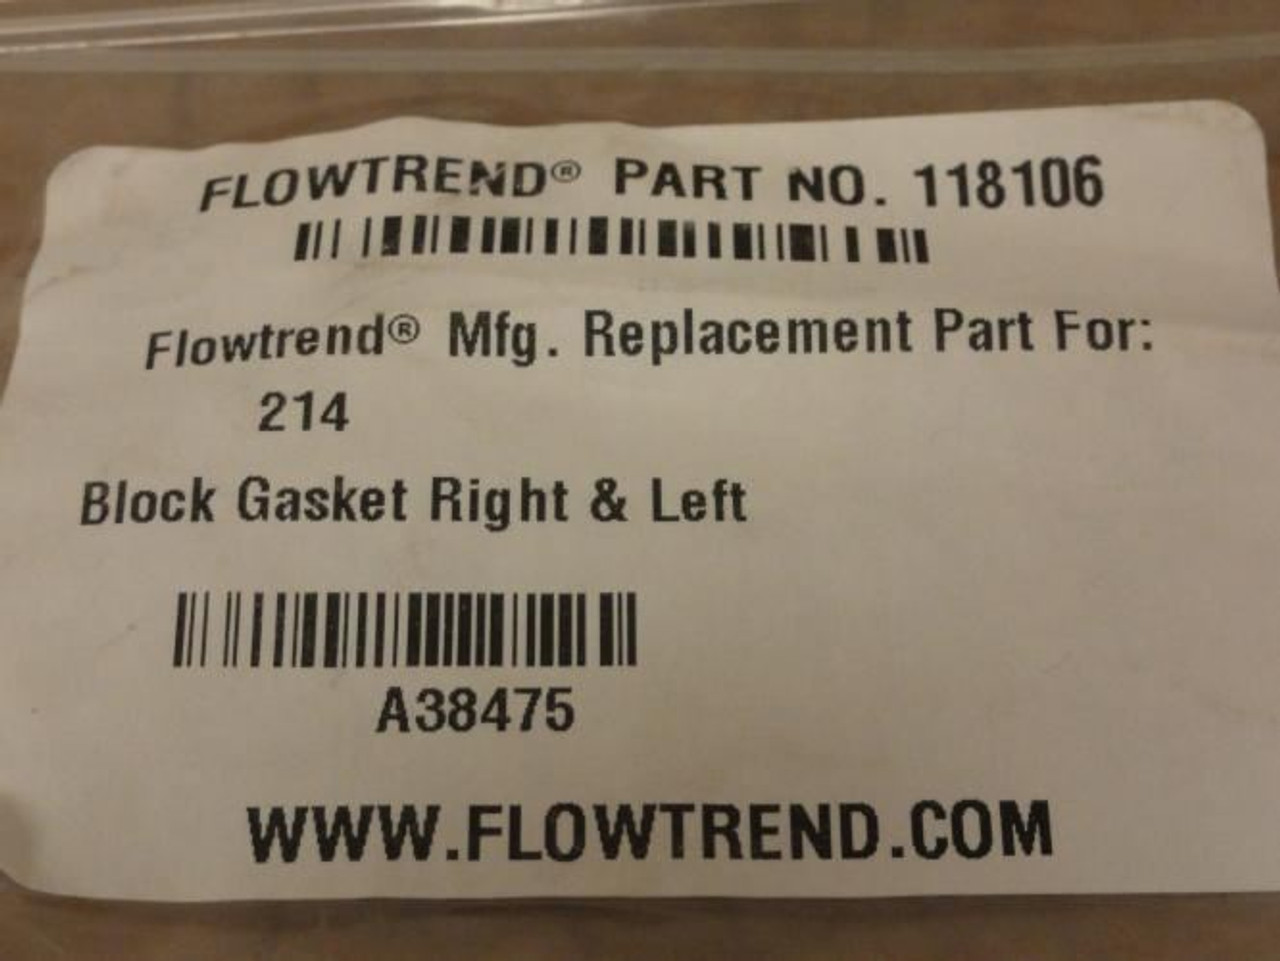 Flowtrend 118106, Set-2 Right & Left Block Gasket, 5-3/4"Lx7"W